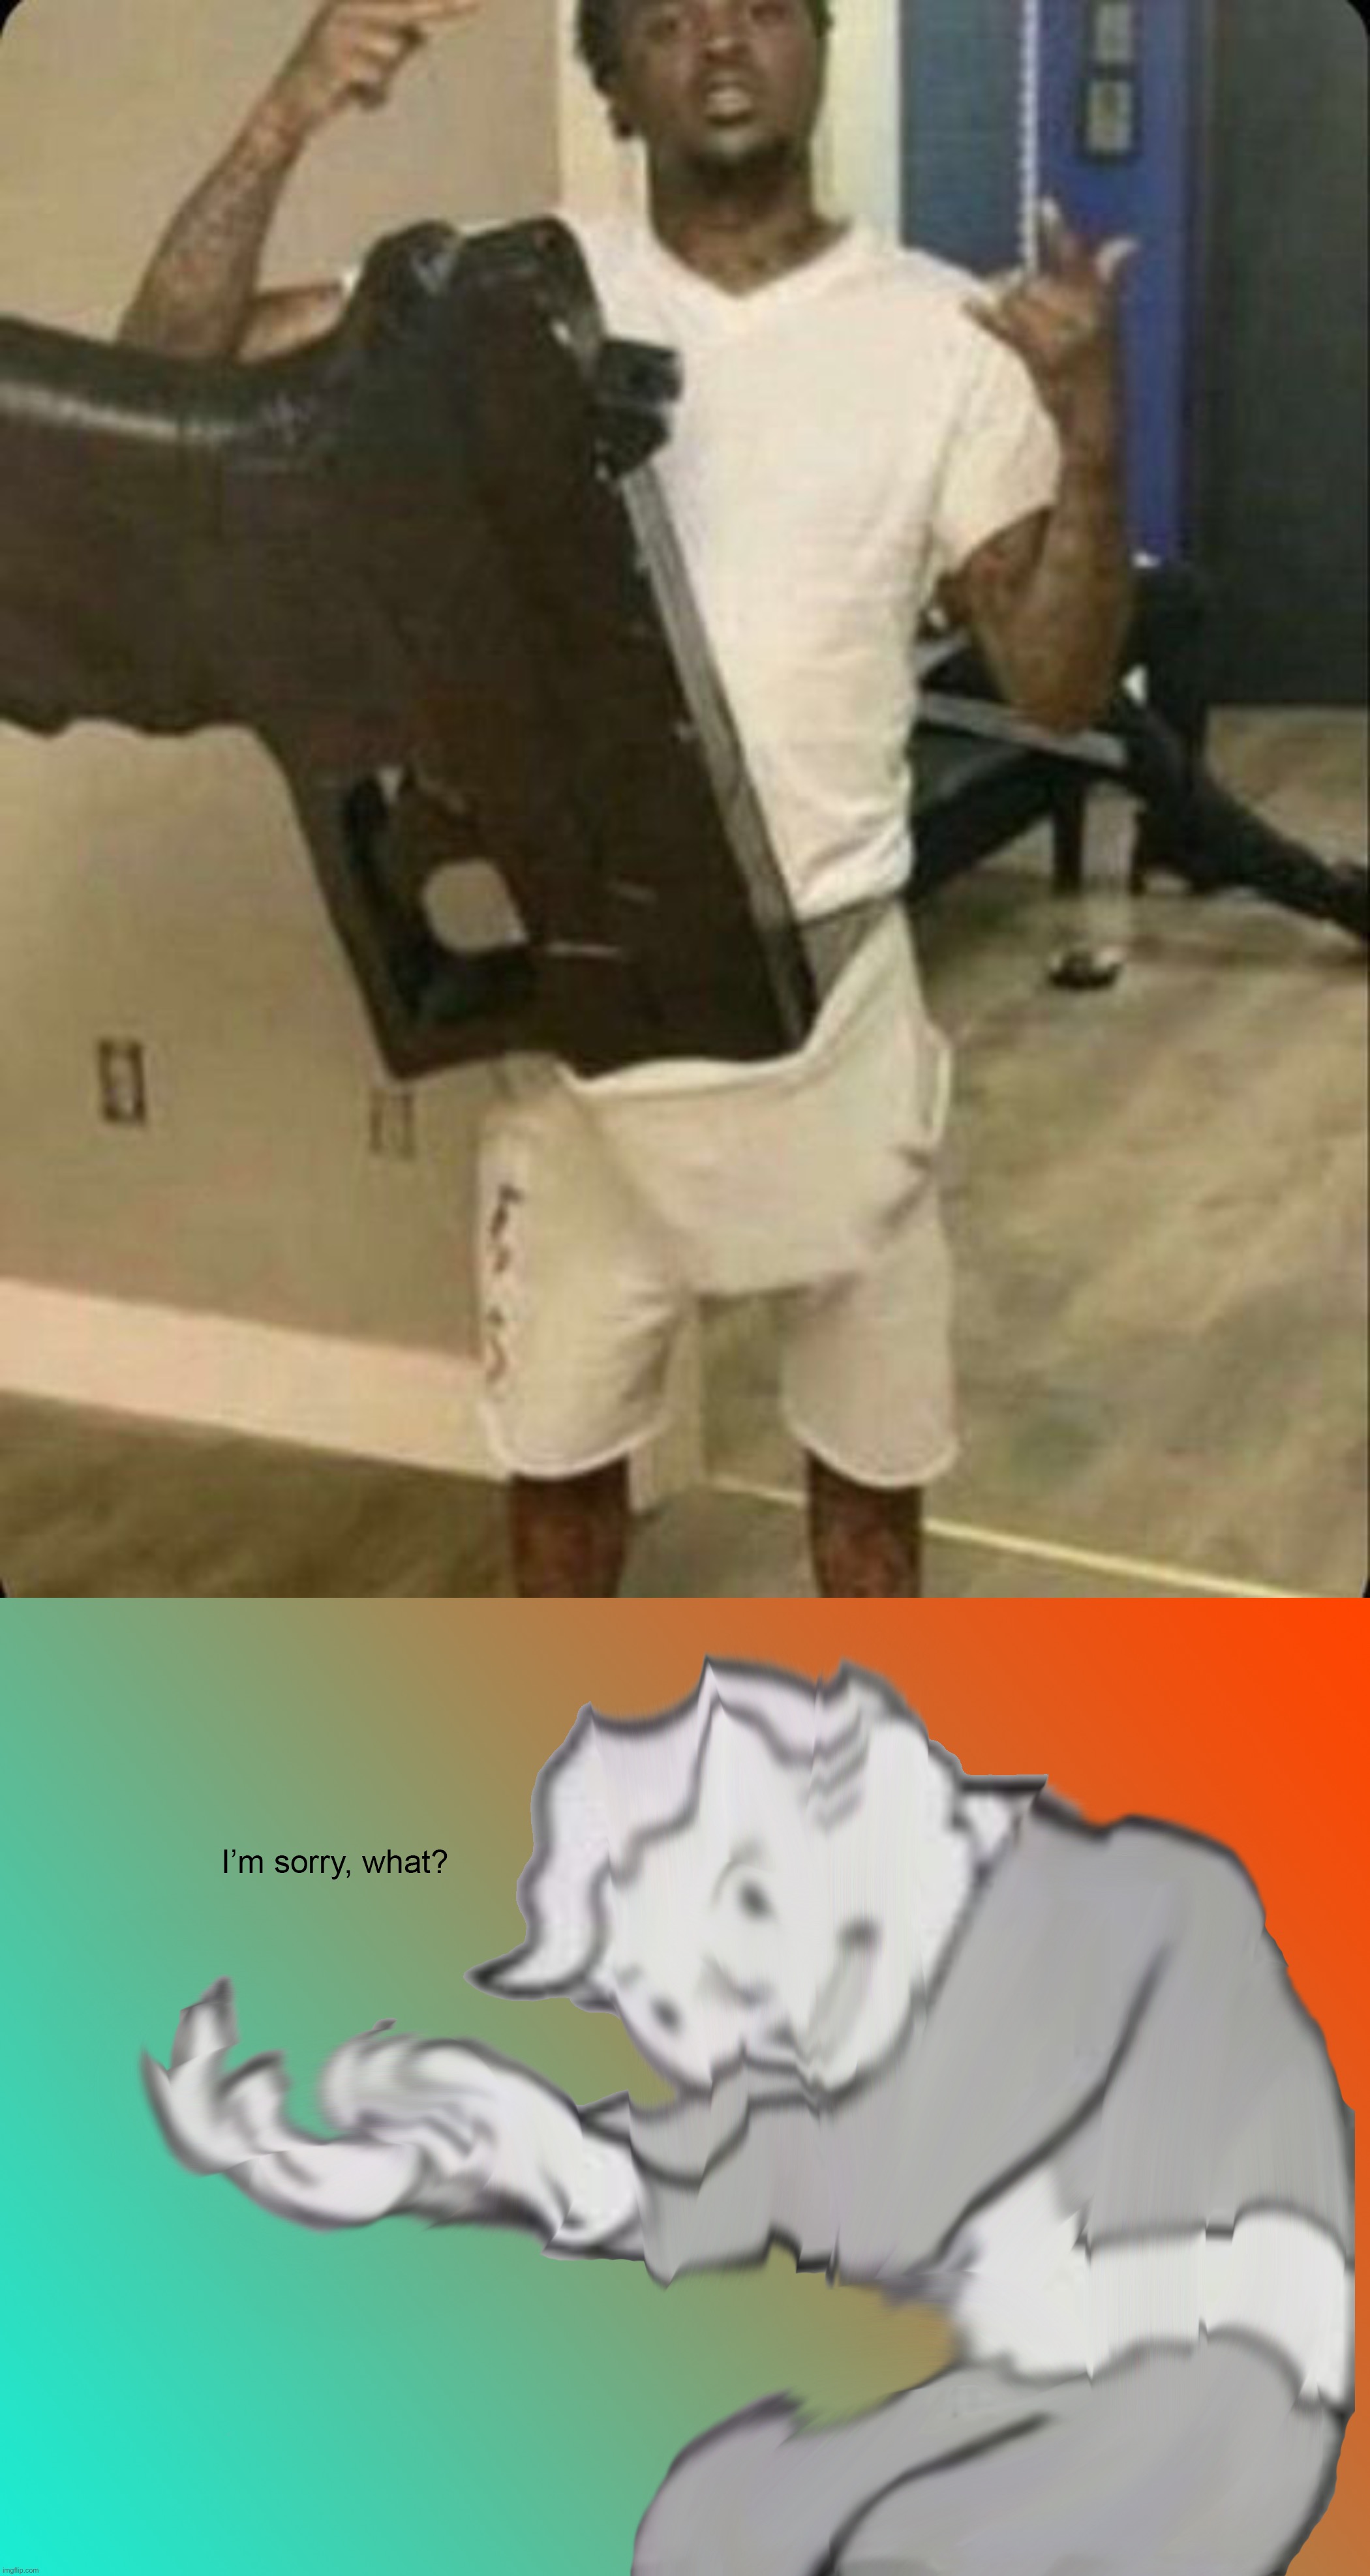 Big ass gun | image tagged in i'm sorry what,memes,funny,cursed image | made w/ Imgflip meme maker